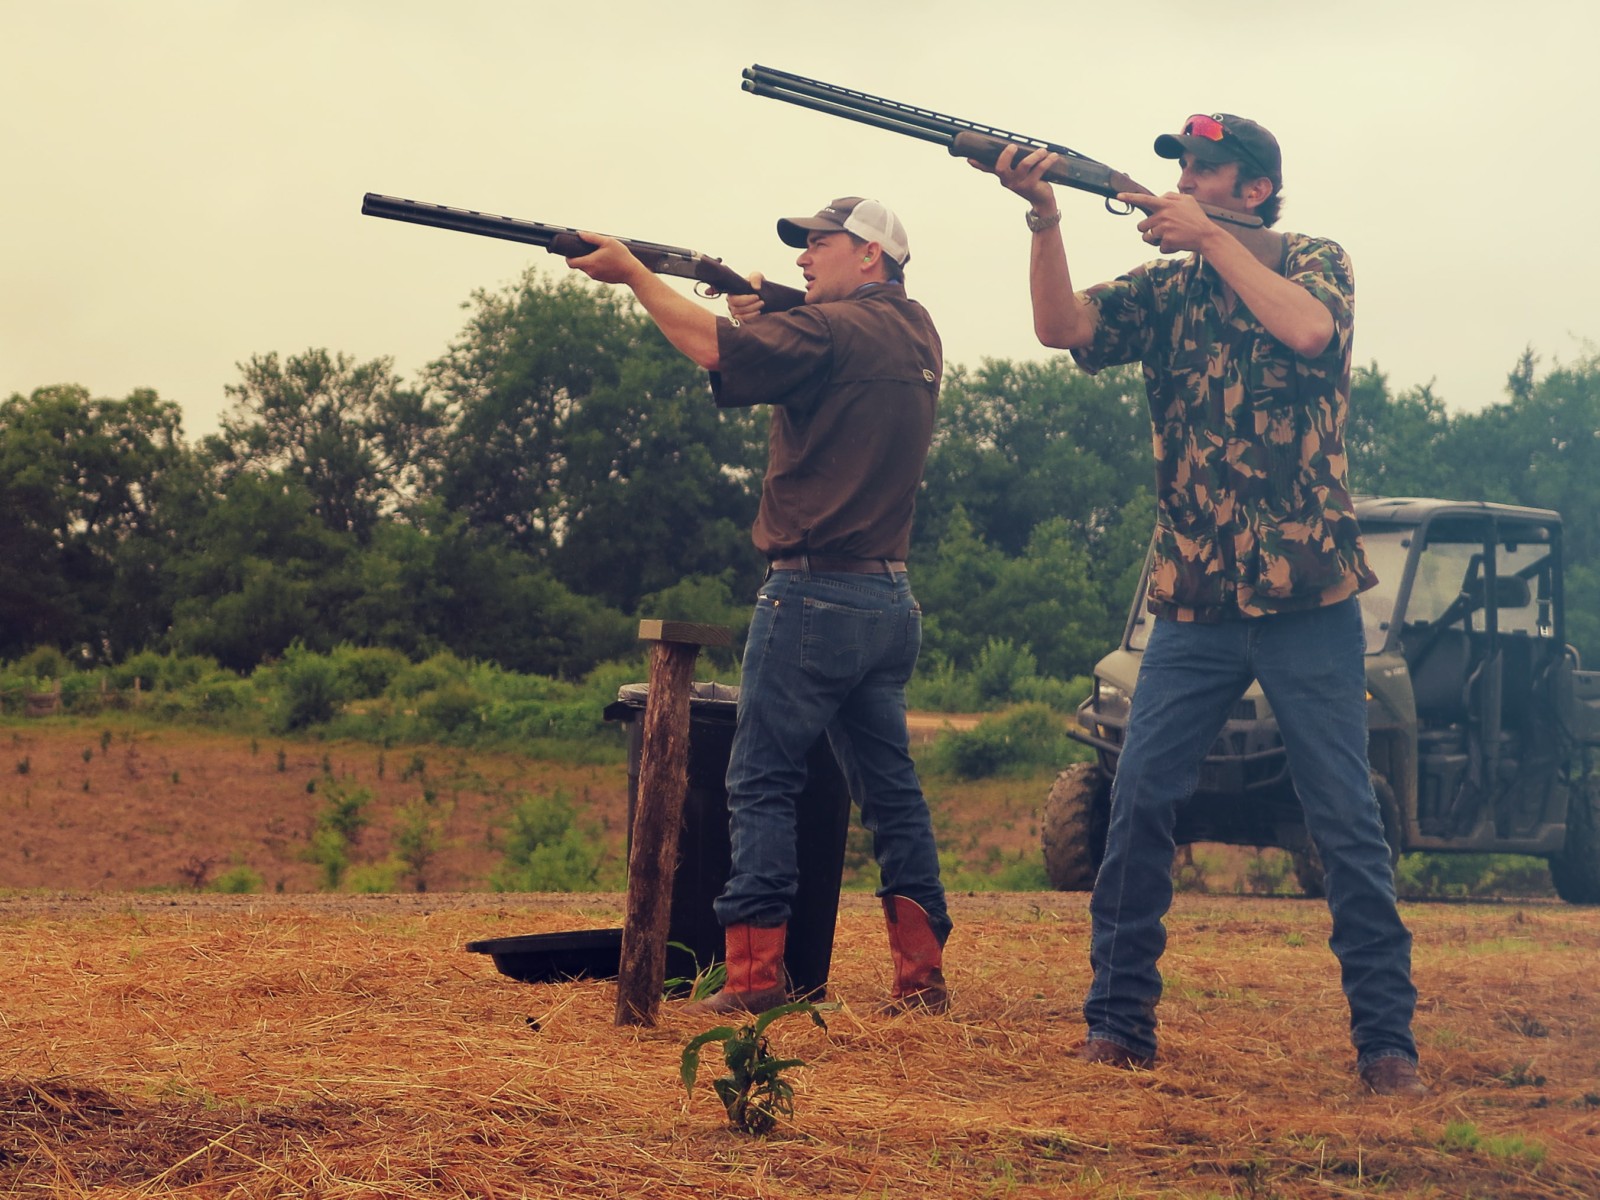 hunters at sporting clays at Mossy Oak Properties Charity Event